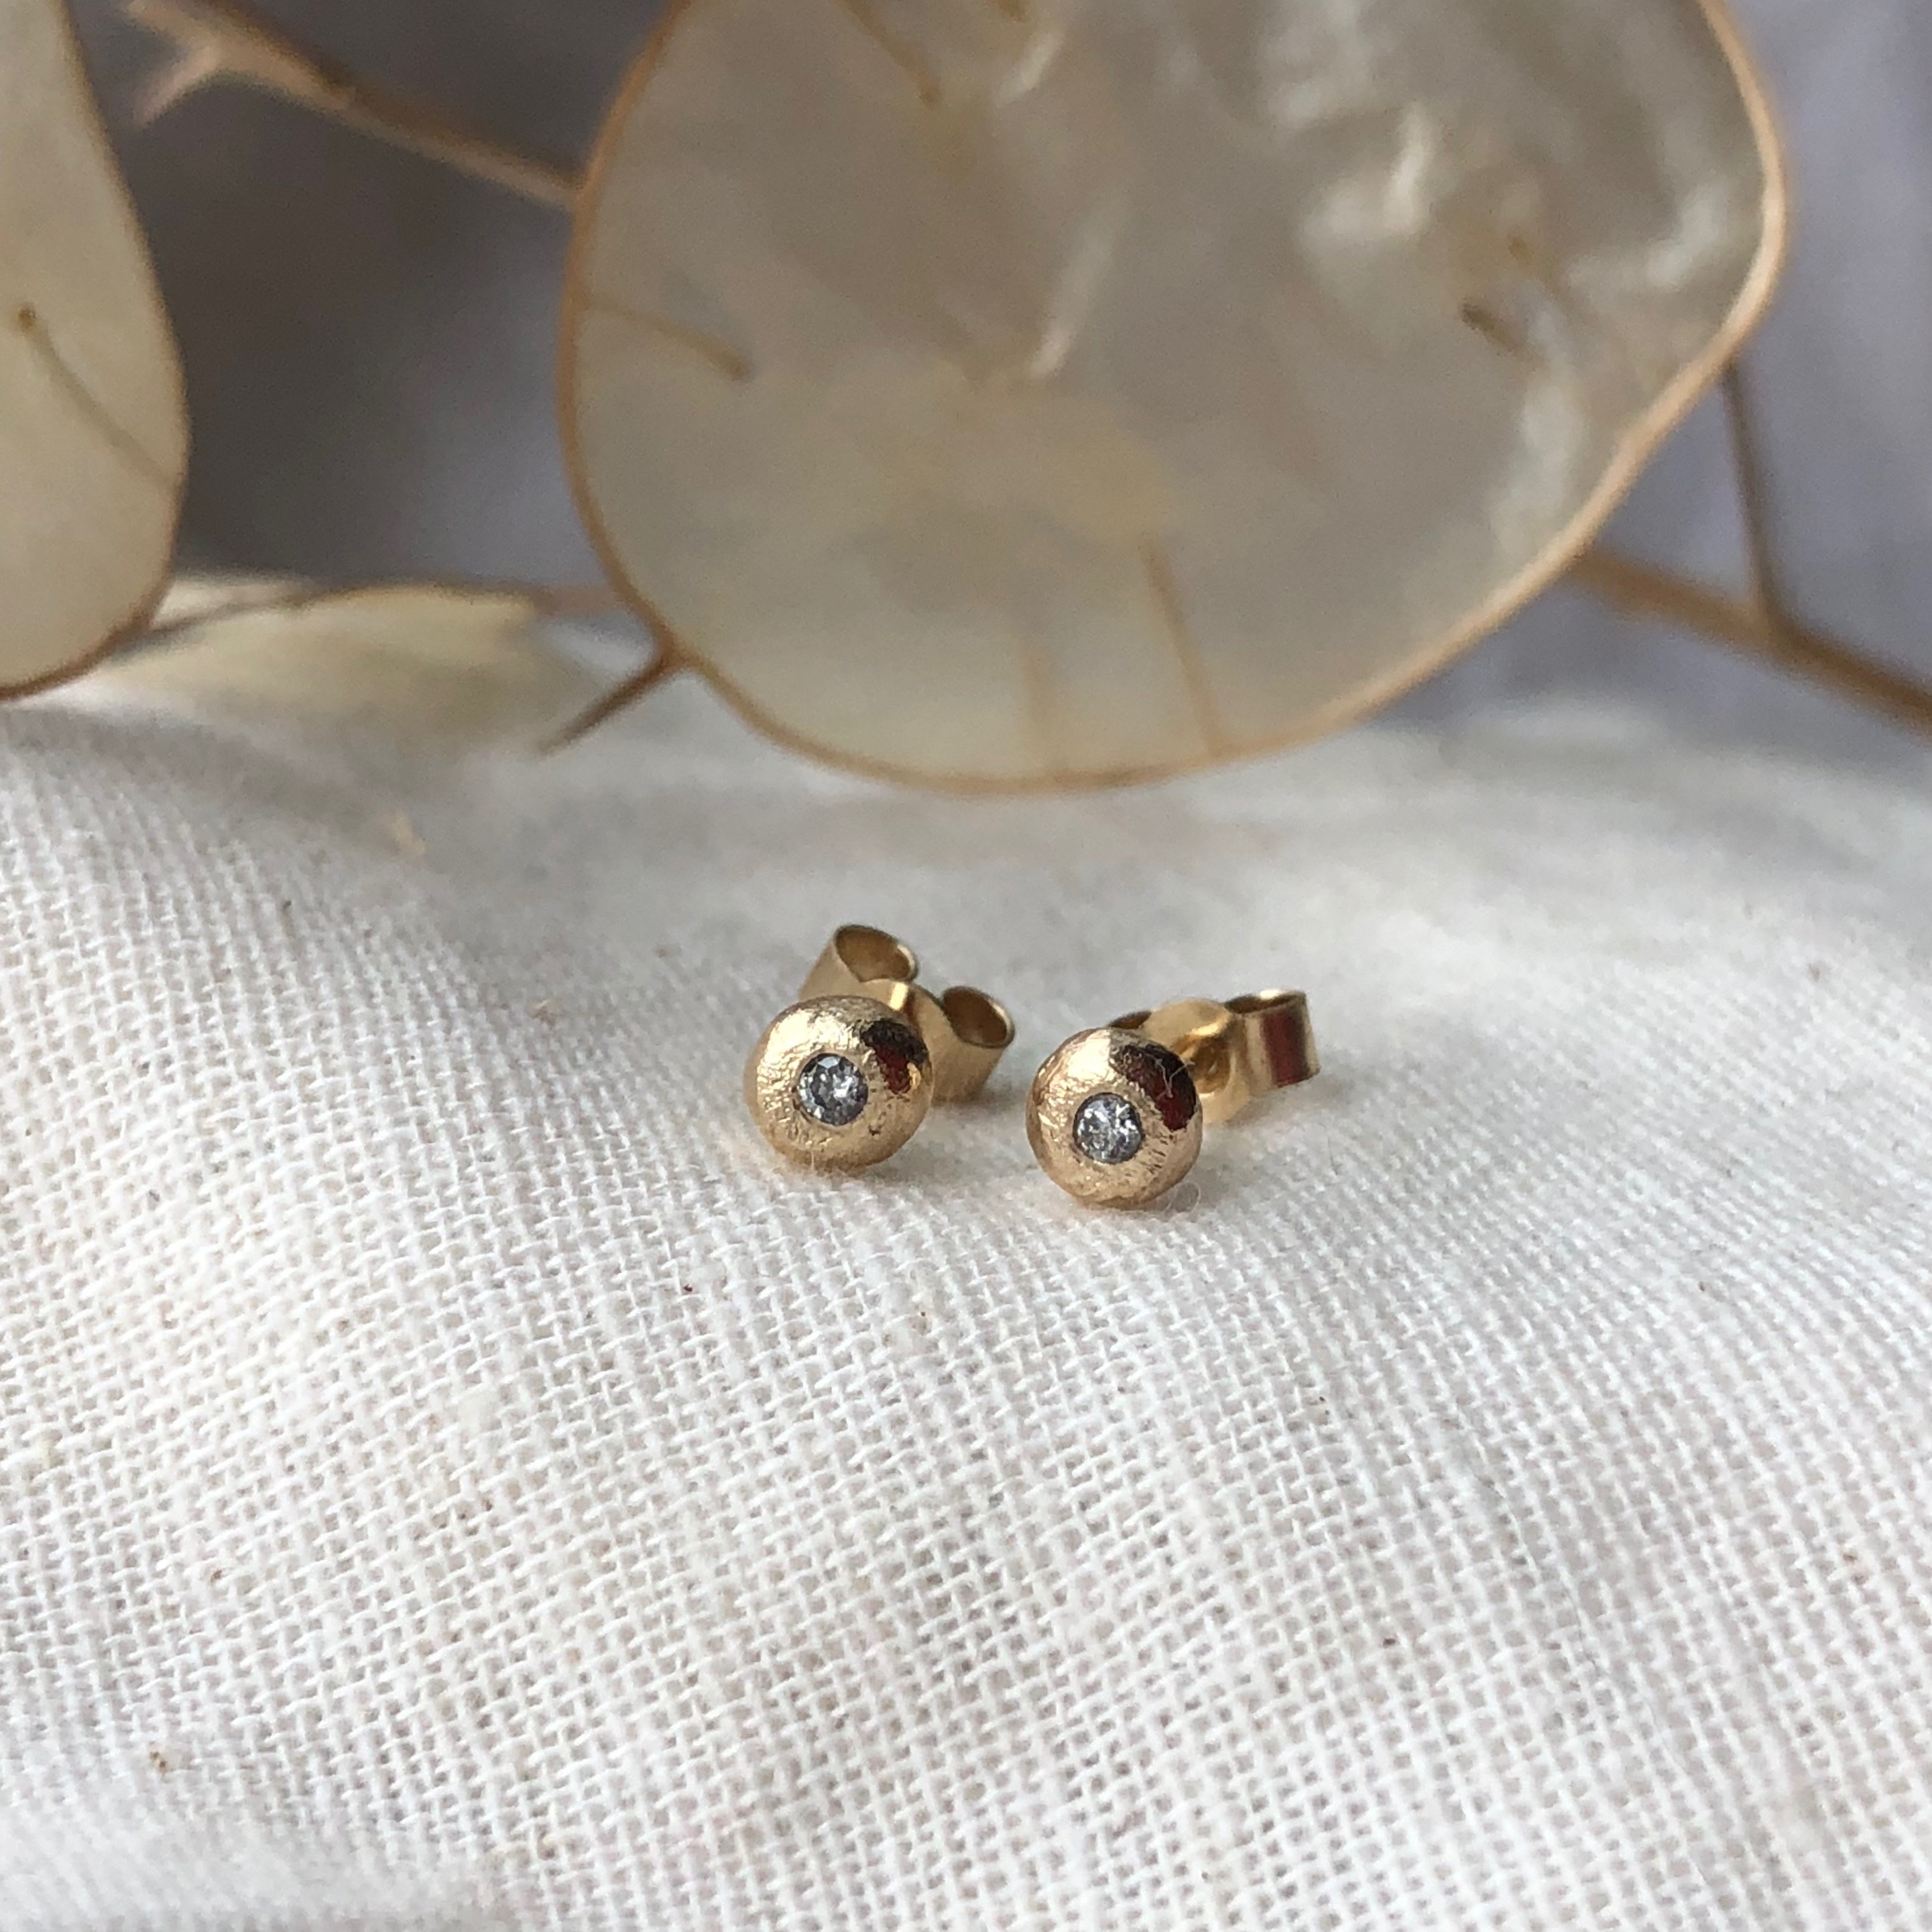 Recycled Gold Diamond Stud Earrings, Salt & Pepper Studs, Small Solid Pebble Studs